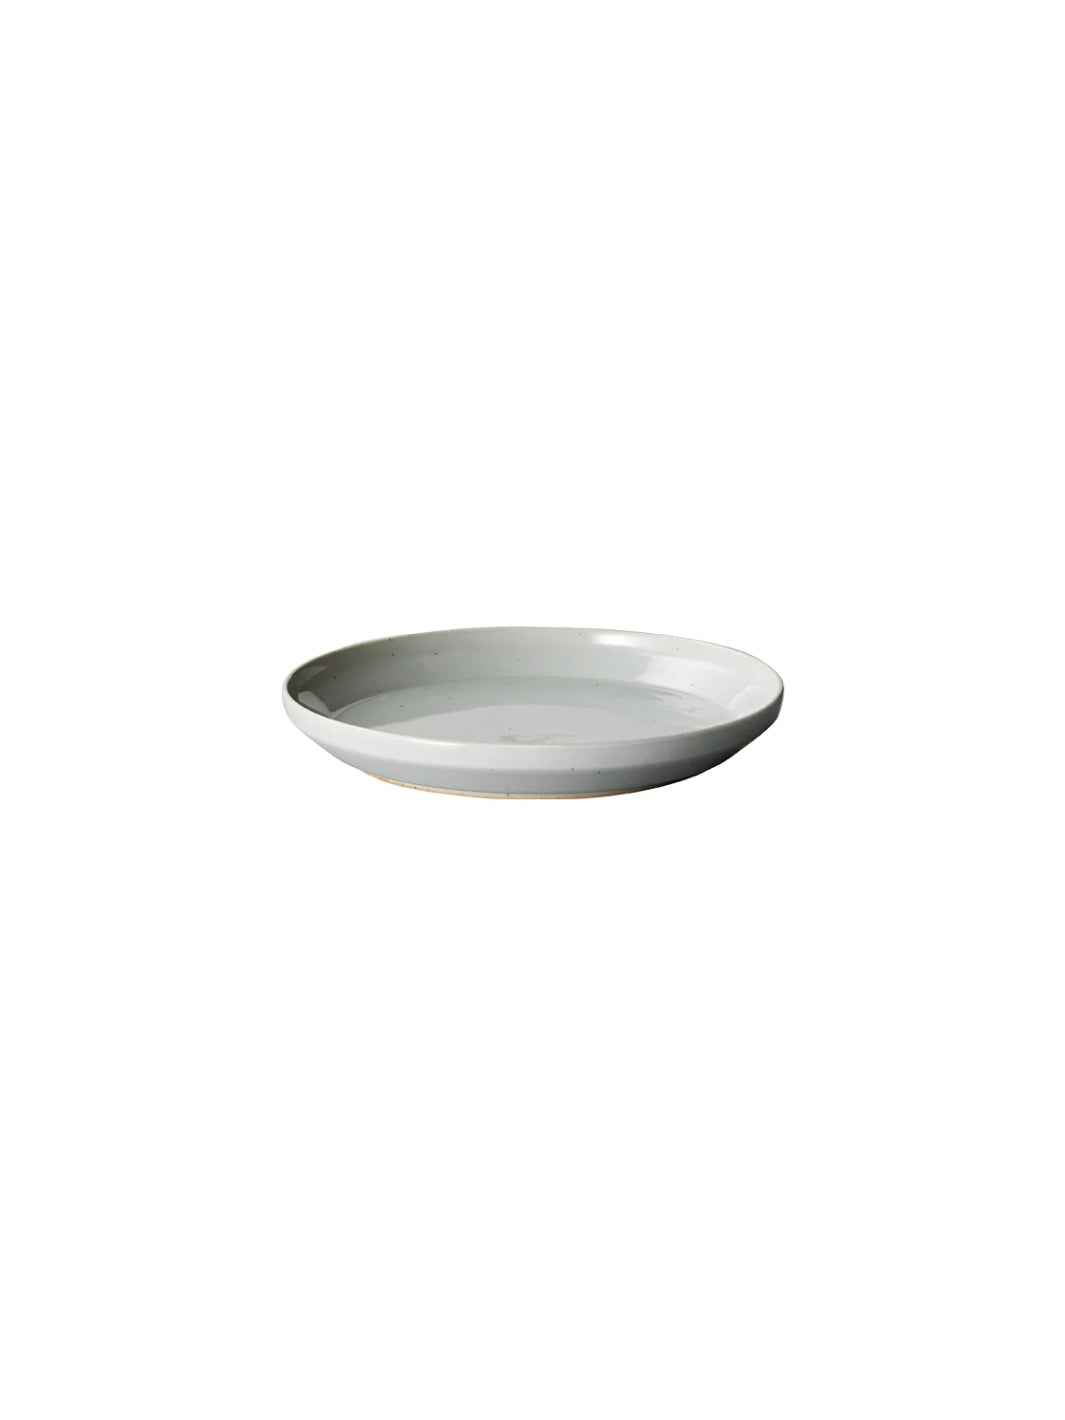 KINTO RIM Plate (160mm/6.5in)